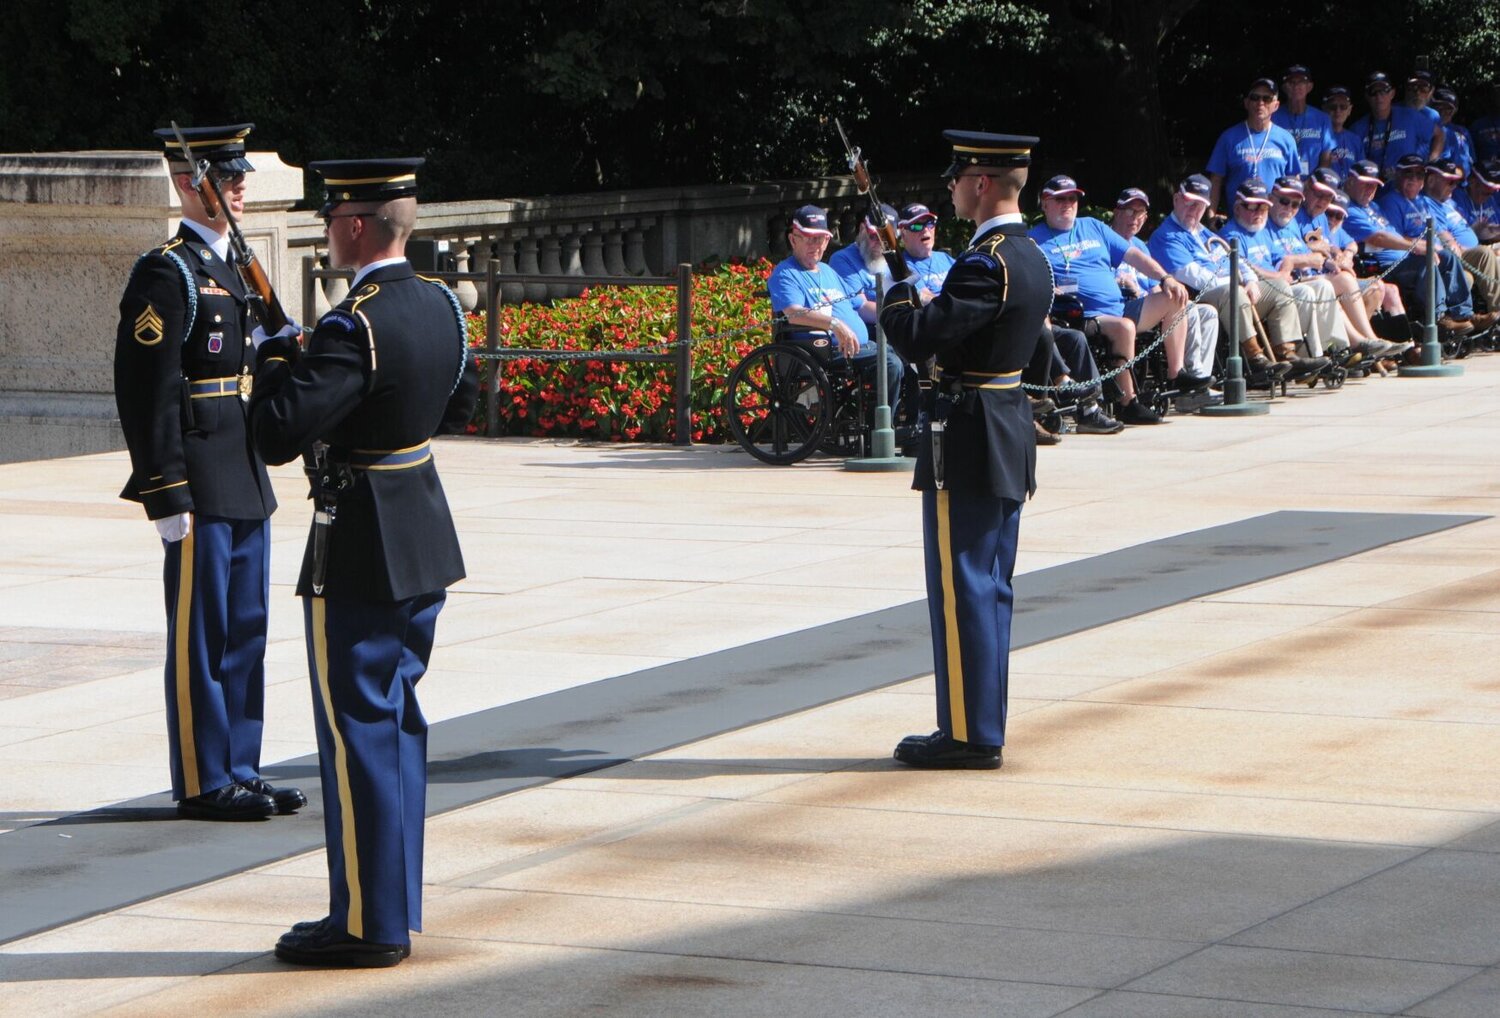 Part of the trip to D.C. provided by Honor Flight of the Ozarks includes watching the changing of the guard at the Tomb of the Unknown Soldier located in Arlington, Va.


Contributed Photos by Honor Flight of the Ozarks.